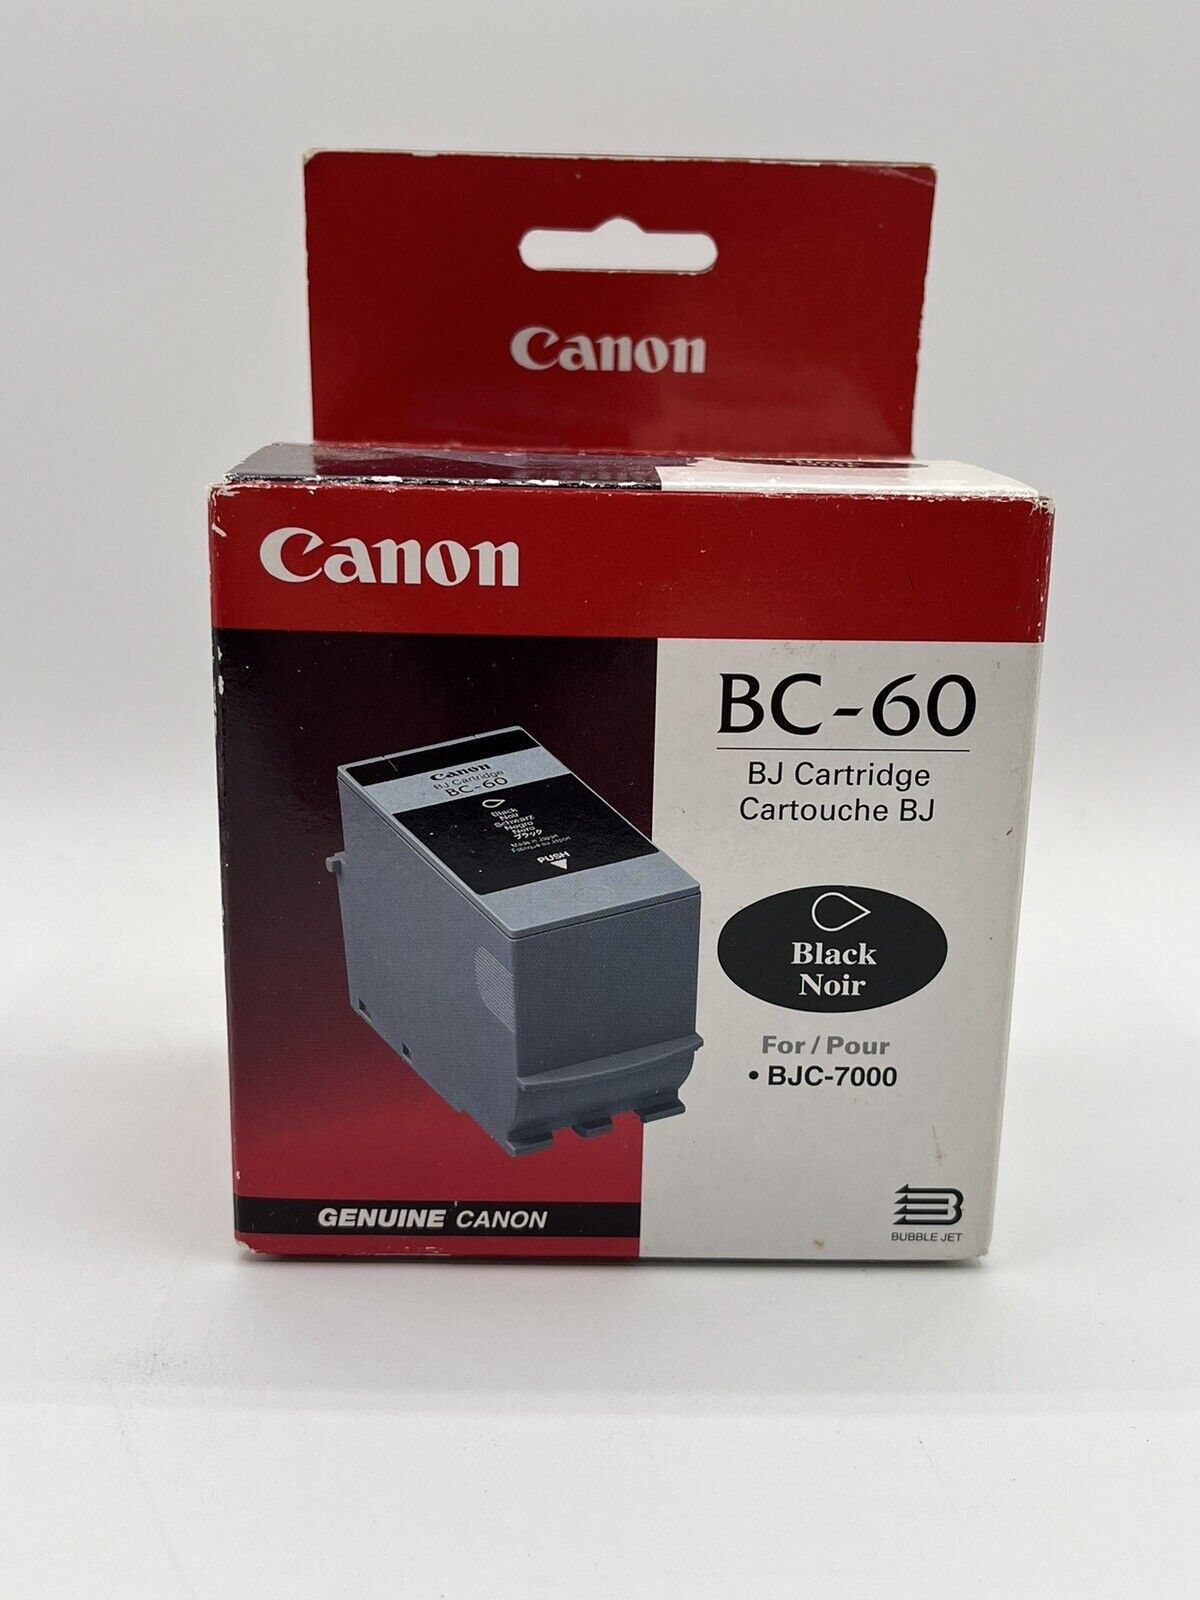 Canon BC-60 Black Ink Cartridge Sealed In Package BJC-7000